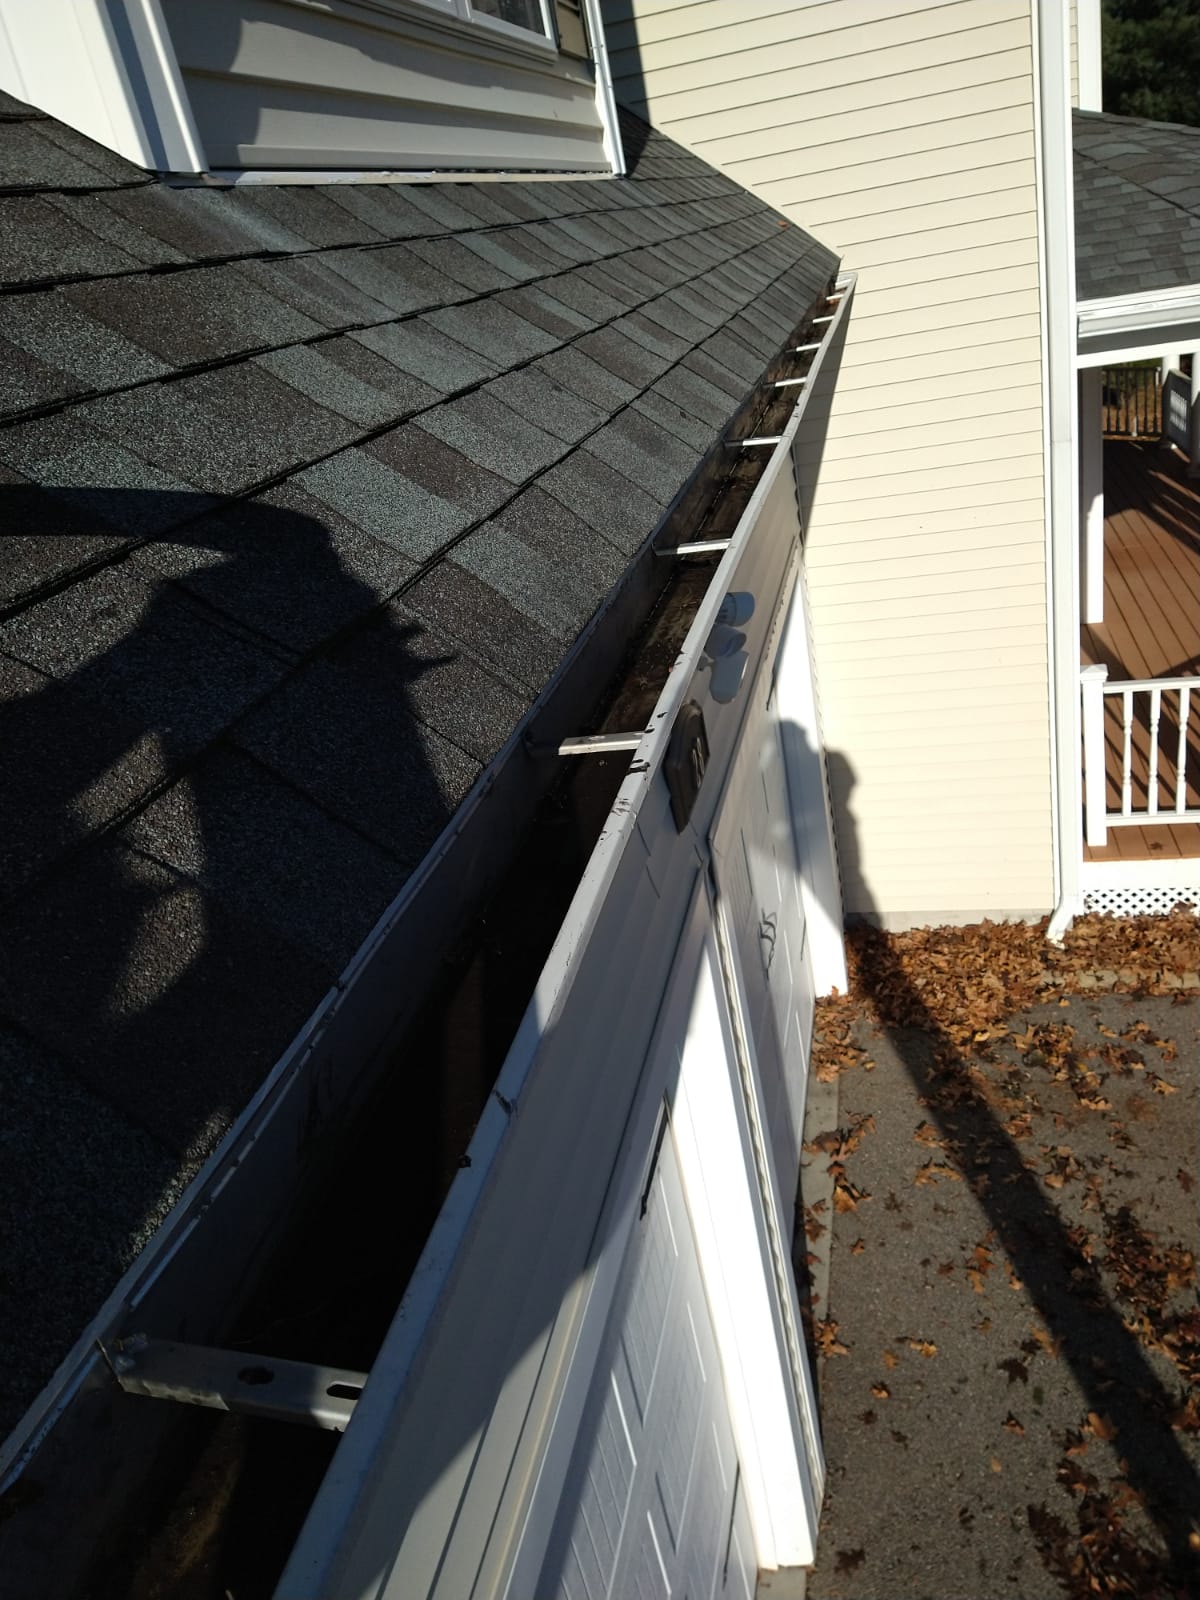 gutter guard cleaning